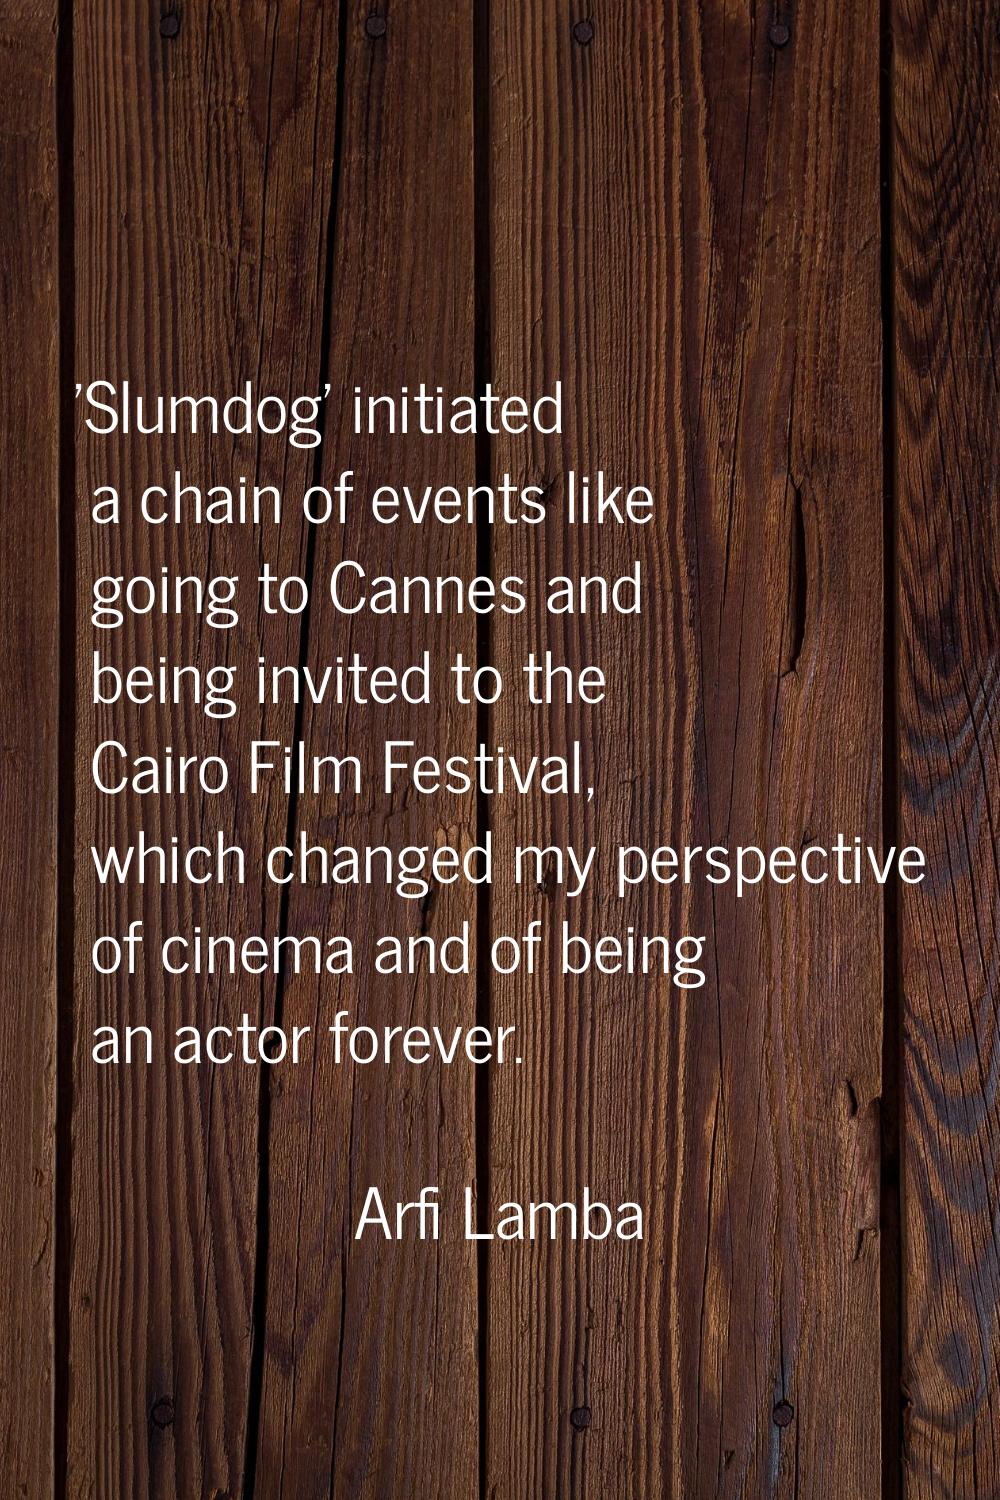 'Slumdog' initiated a chain of events like going to Cannes and being invited to the Cairo Film Fest